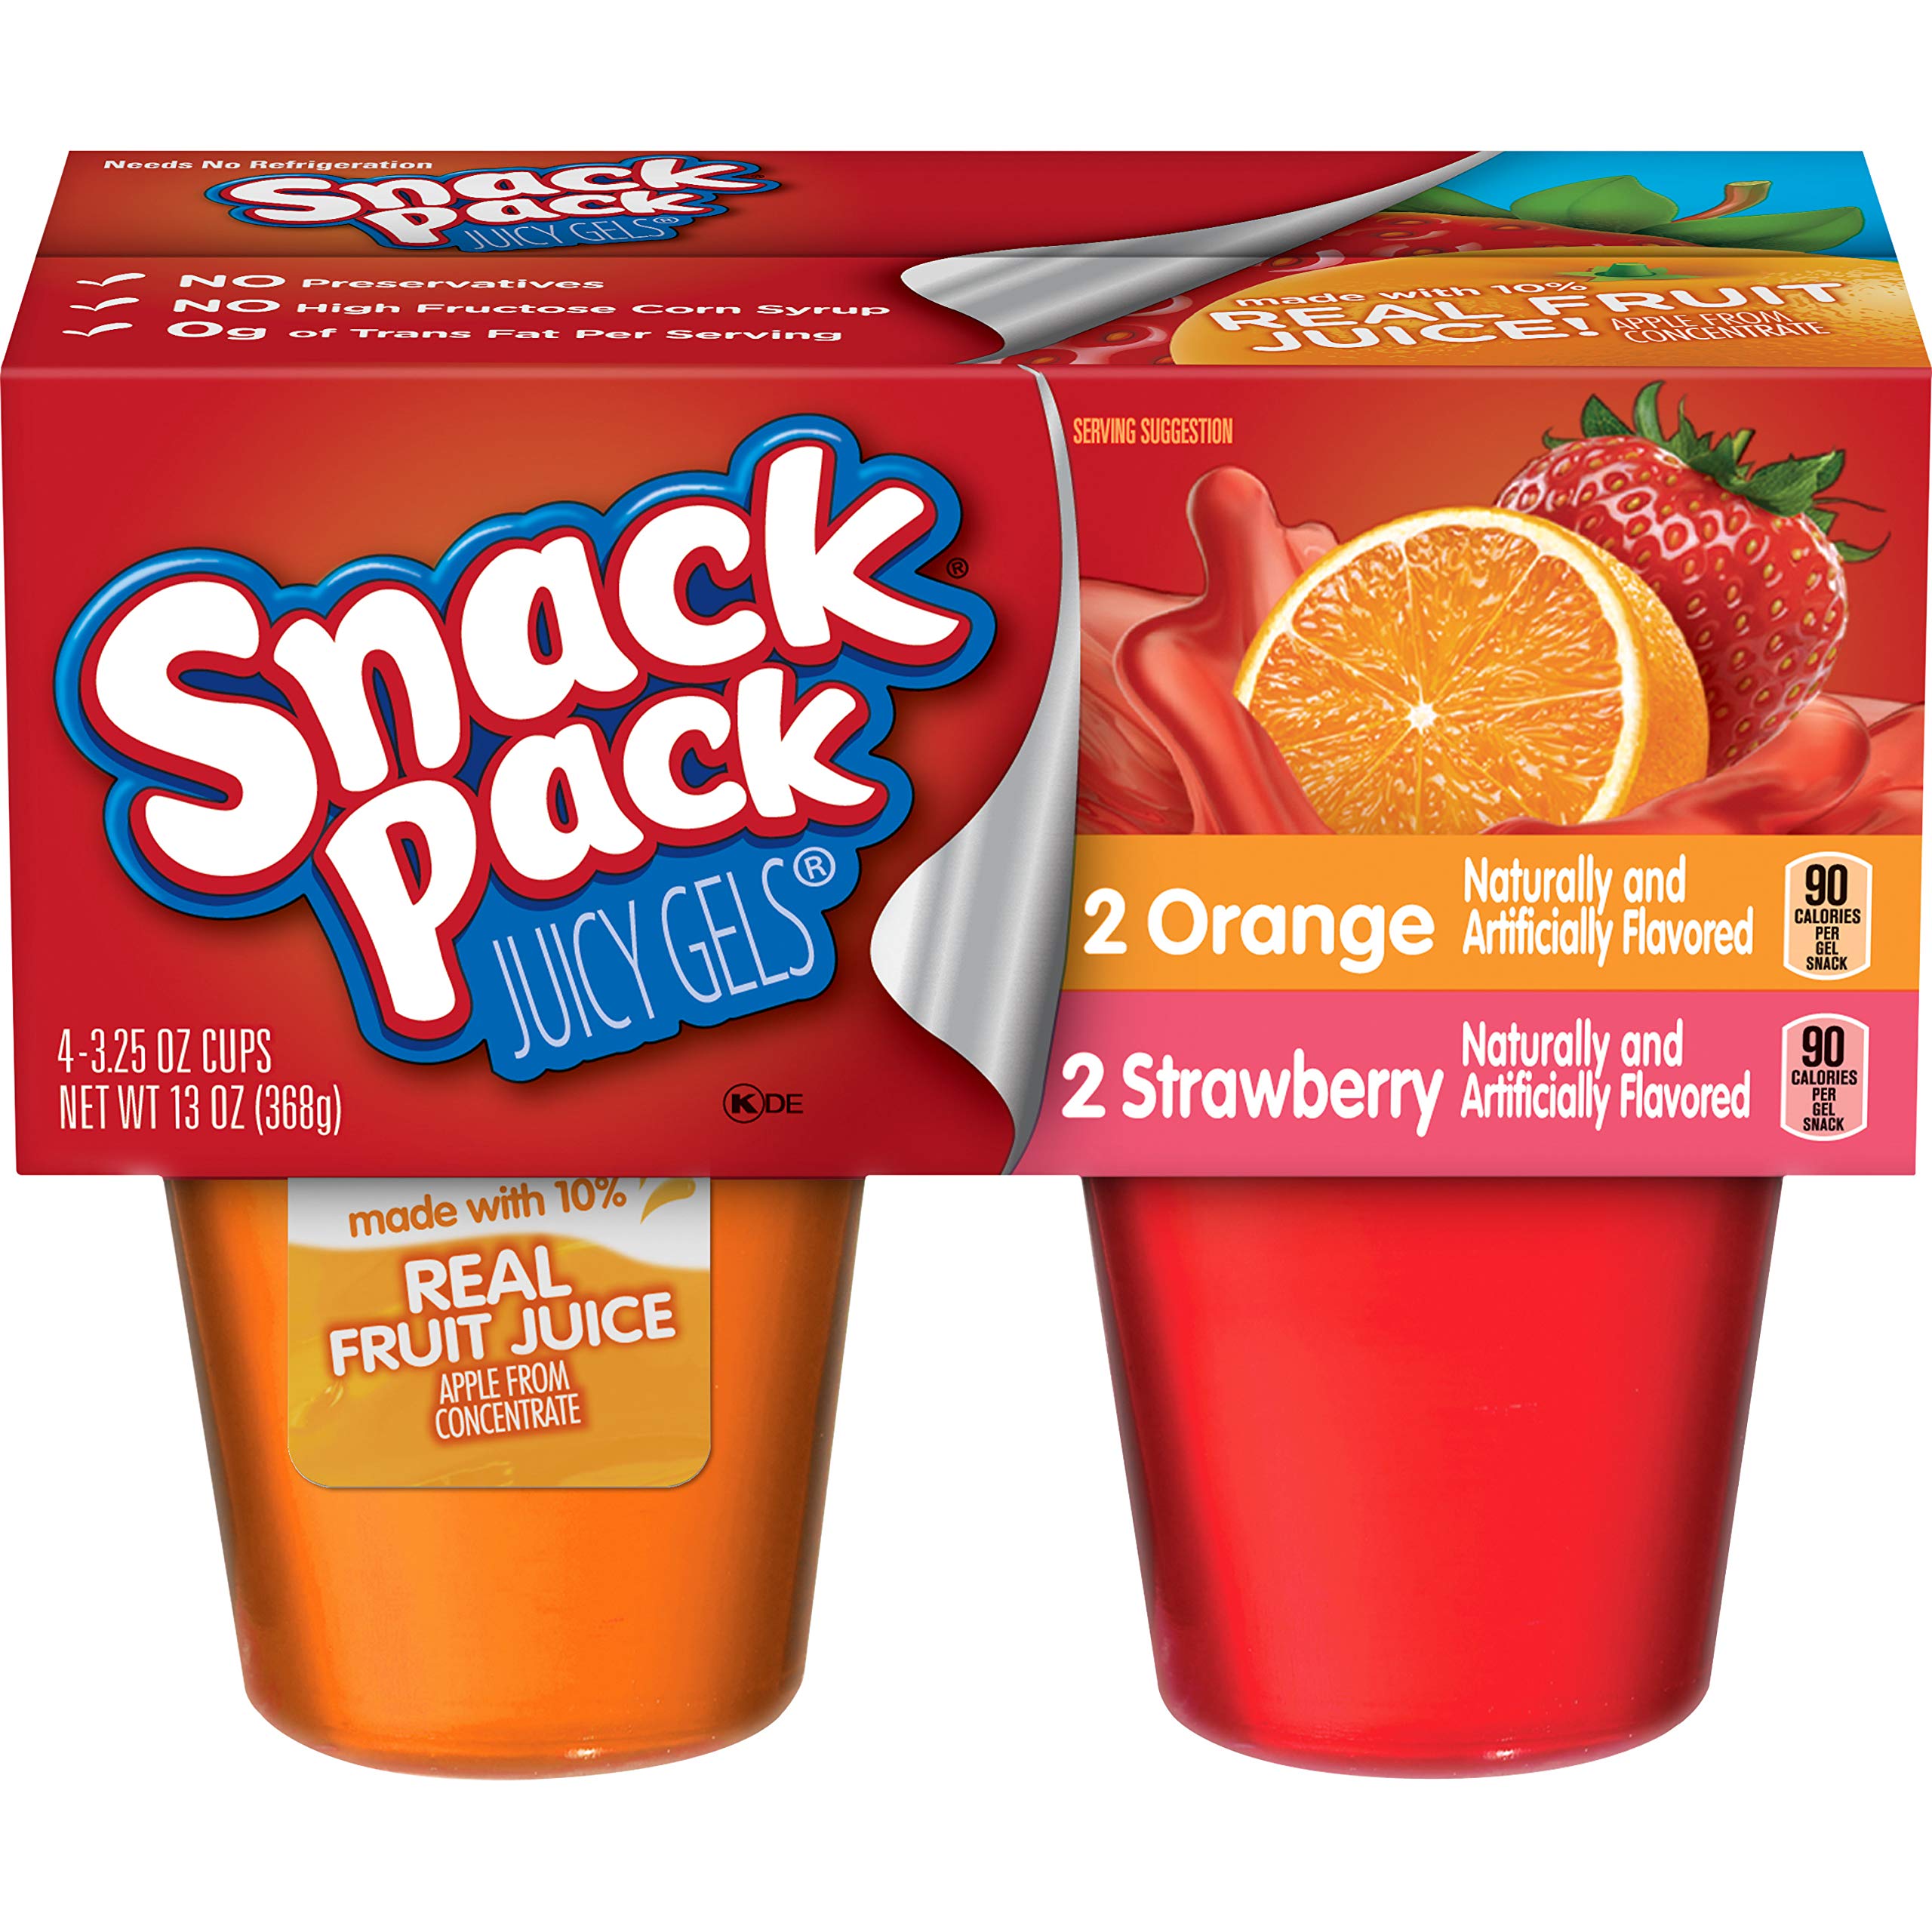 4-Cup 3.25-Ounce Snack Pack Juicy Gels (Strawberry & Orange) $1.20 w S&S + Free Shipping w/ Prime or on orders $35+